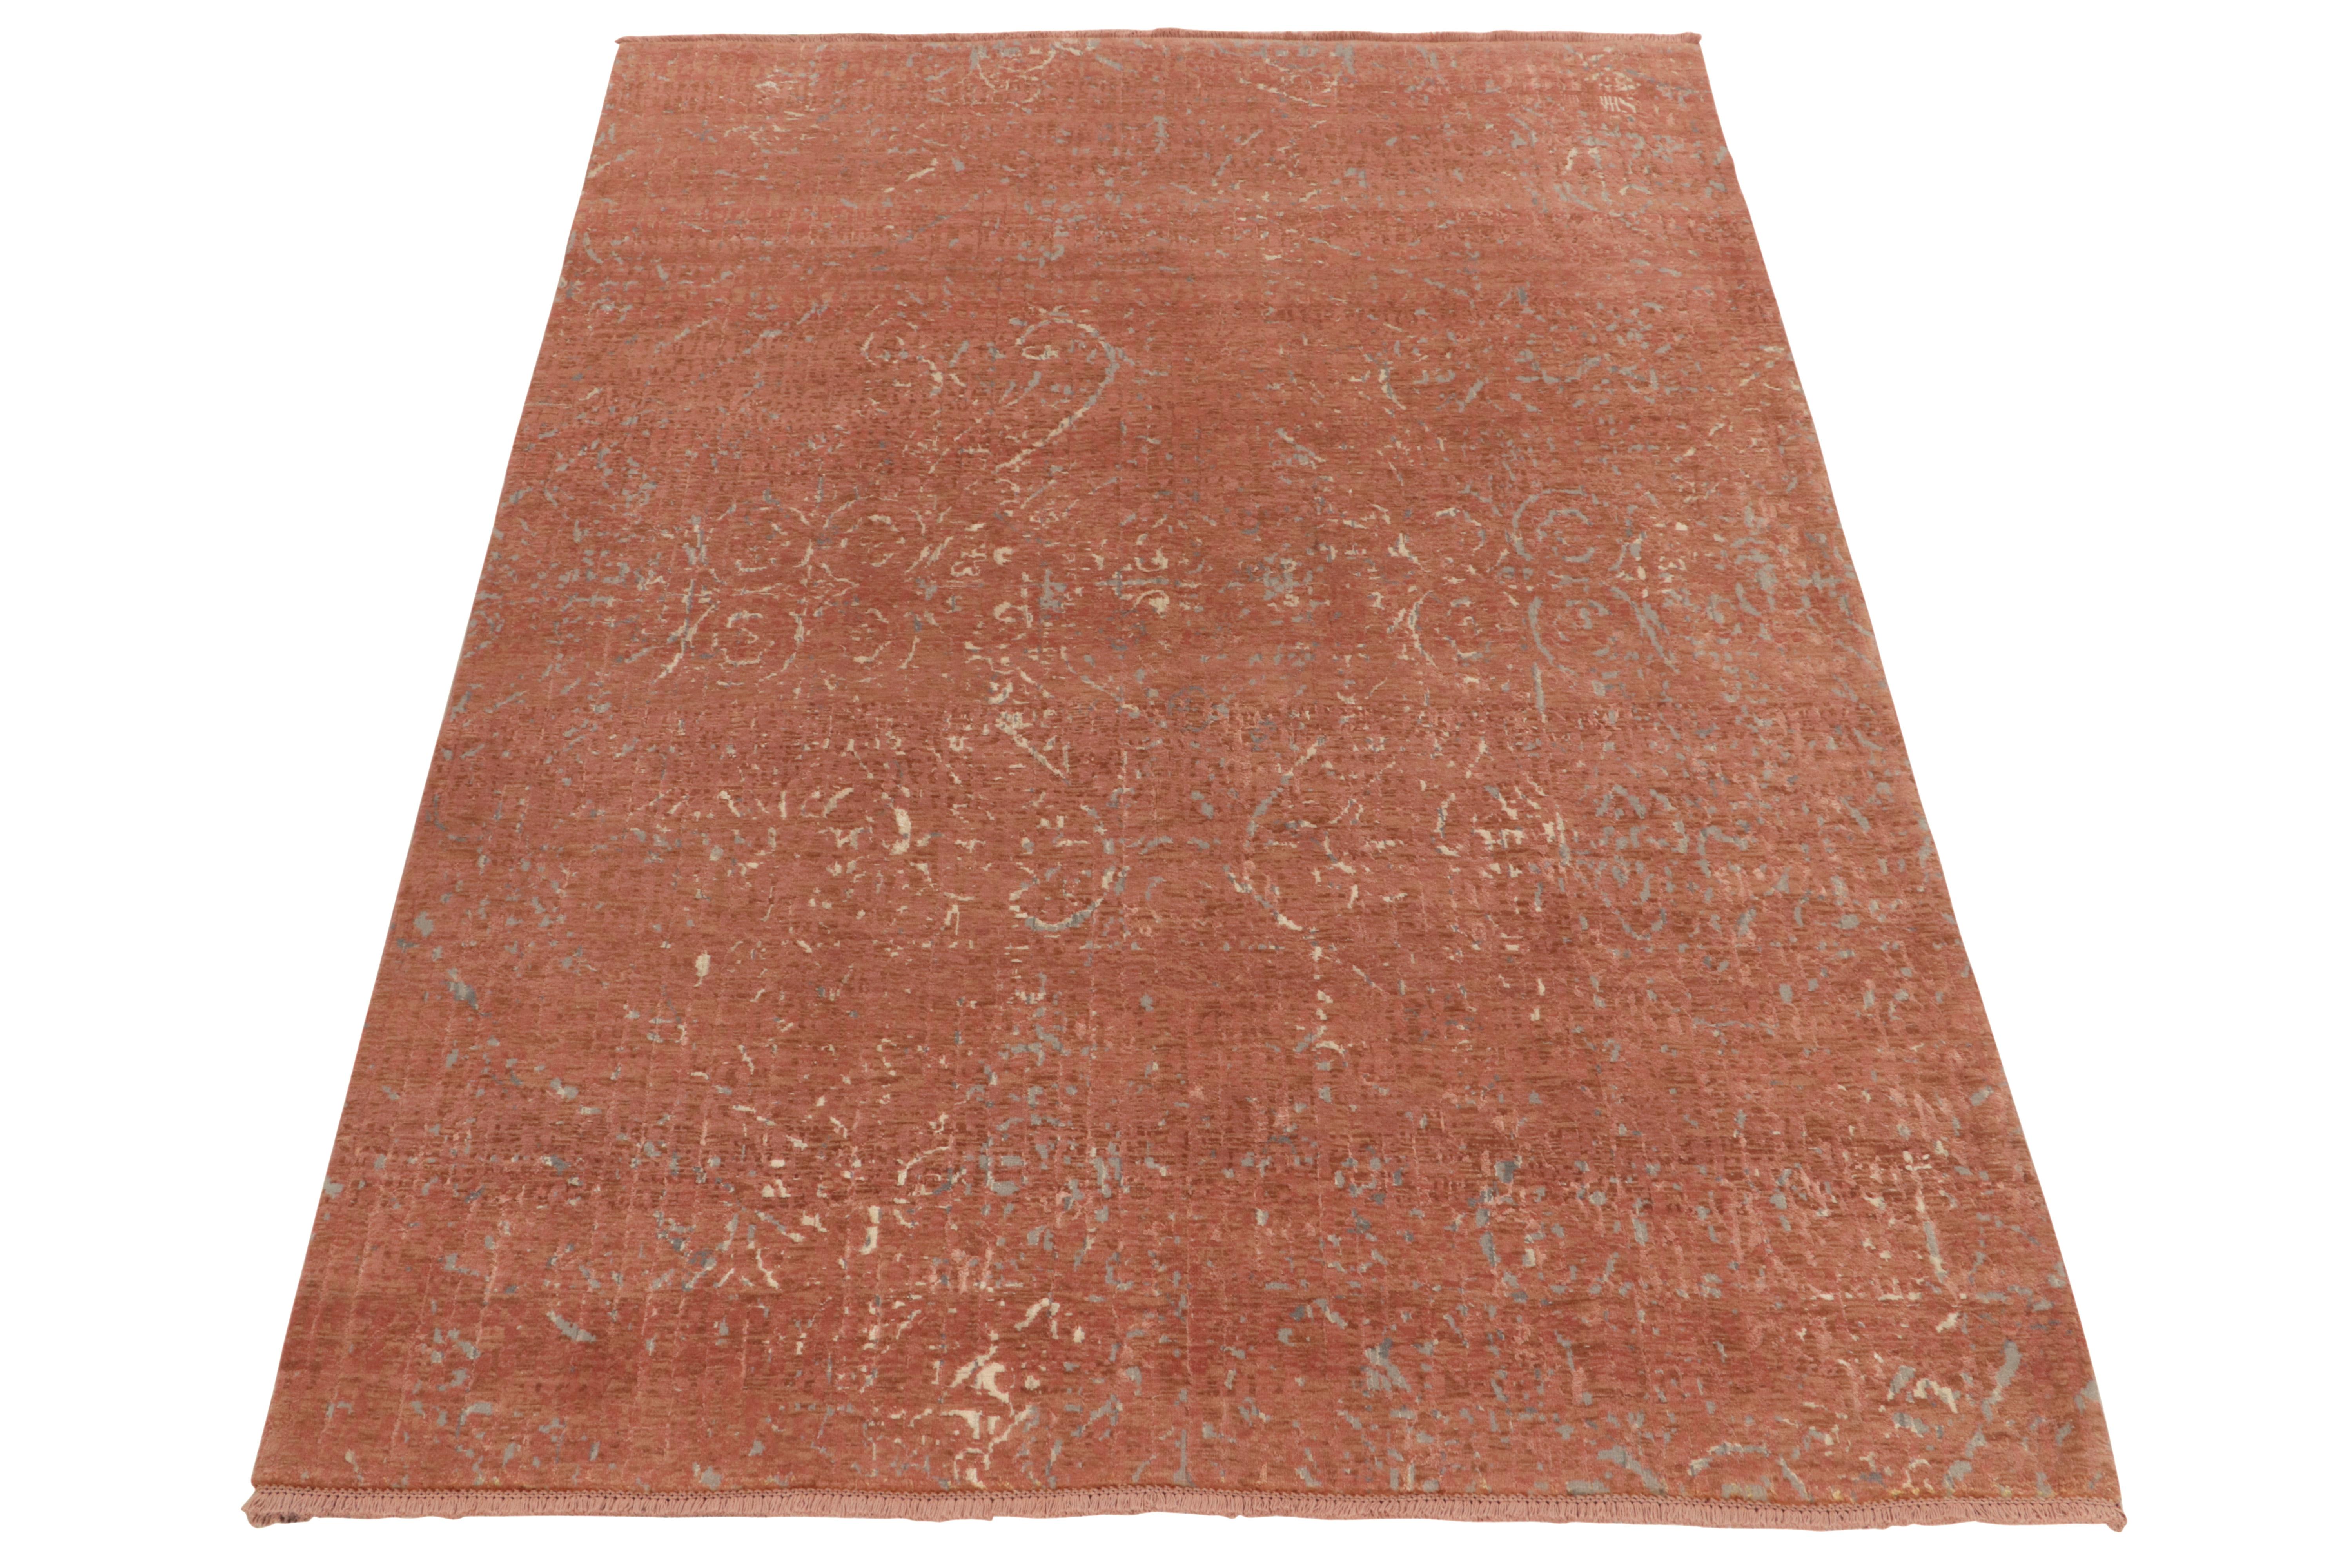 From one of our principal’s finest new partner ateliers among the best workshops in modern weaving, a fabulous contemporary piece enjoying impeccable texture and intelligence. The brilliantly modern rug employs warm brown & pink to play with